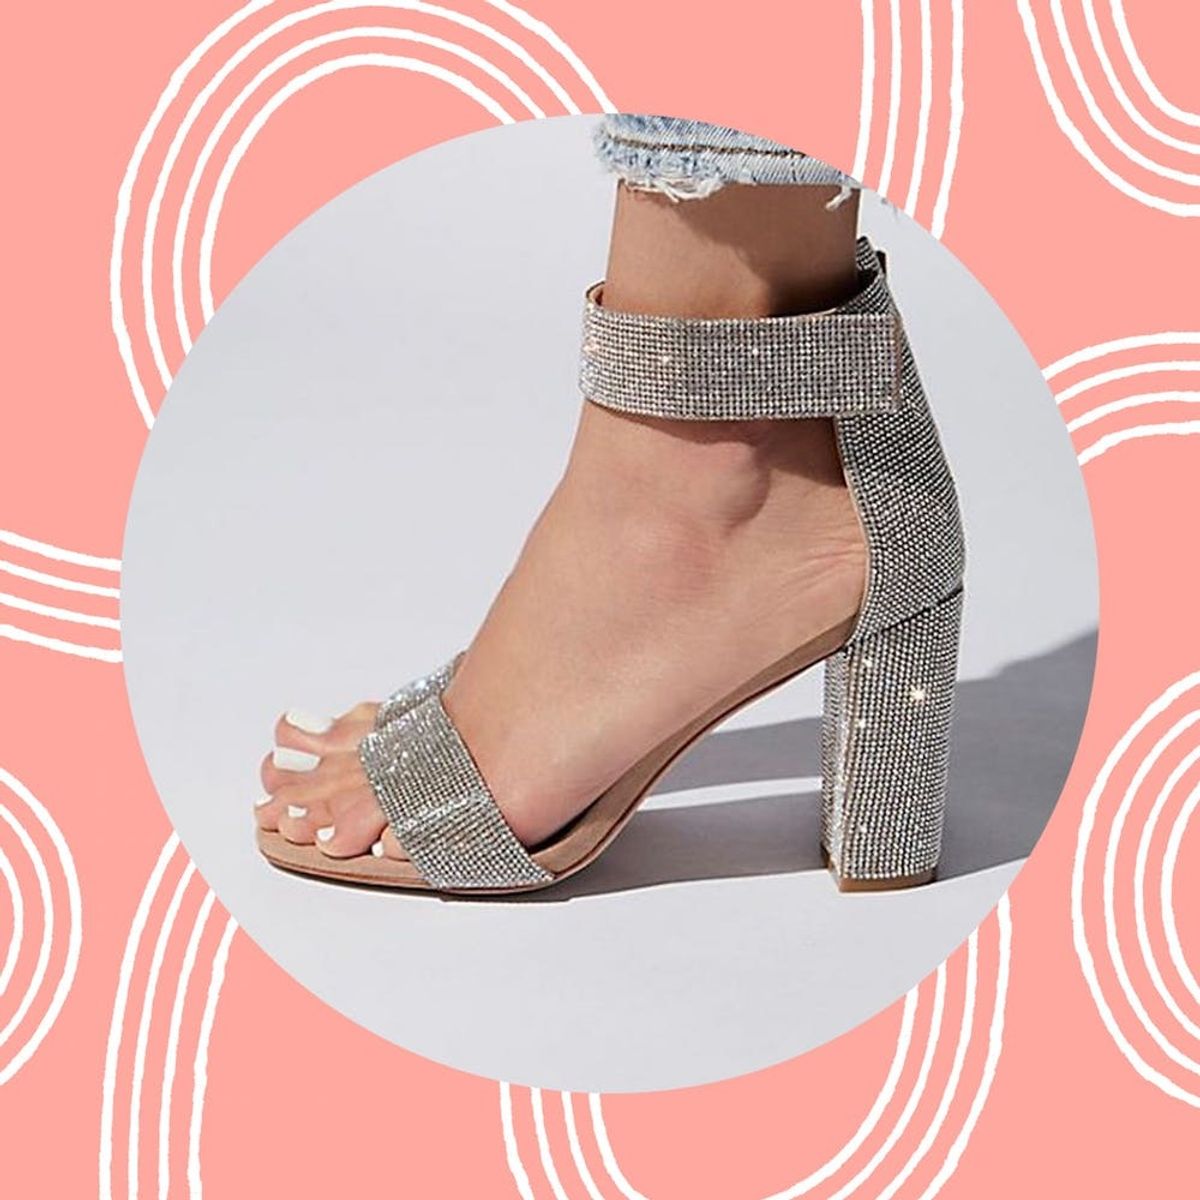 20 Spring 2018 Statement Shoes That Totally Work for Your Wedding